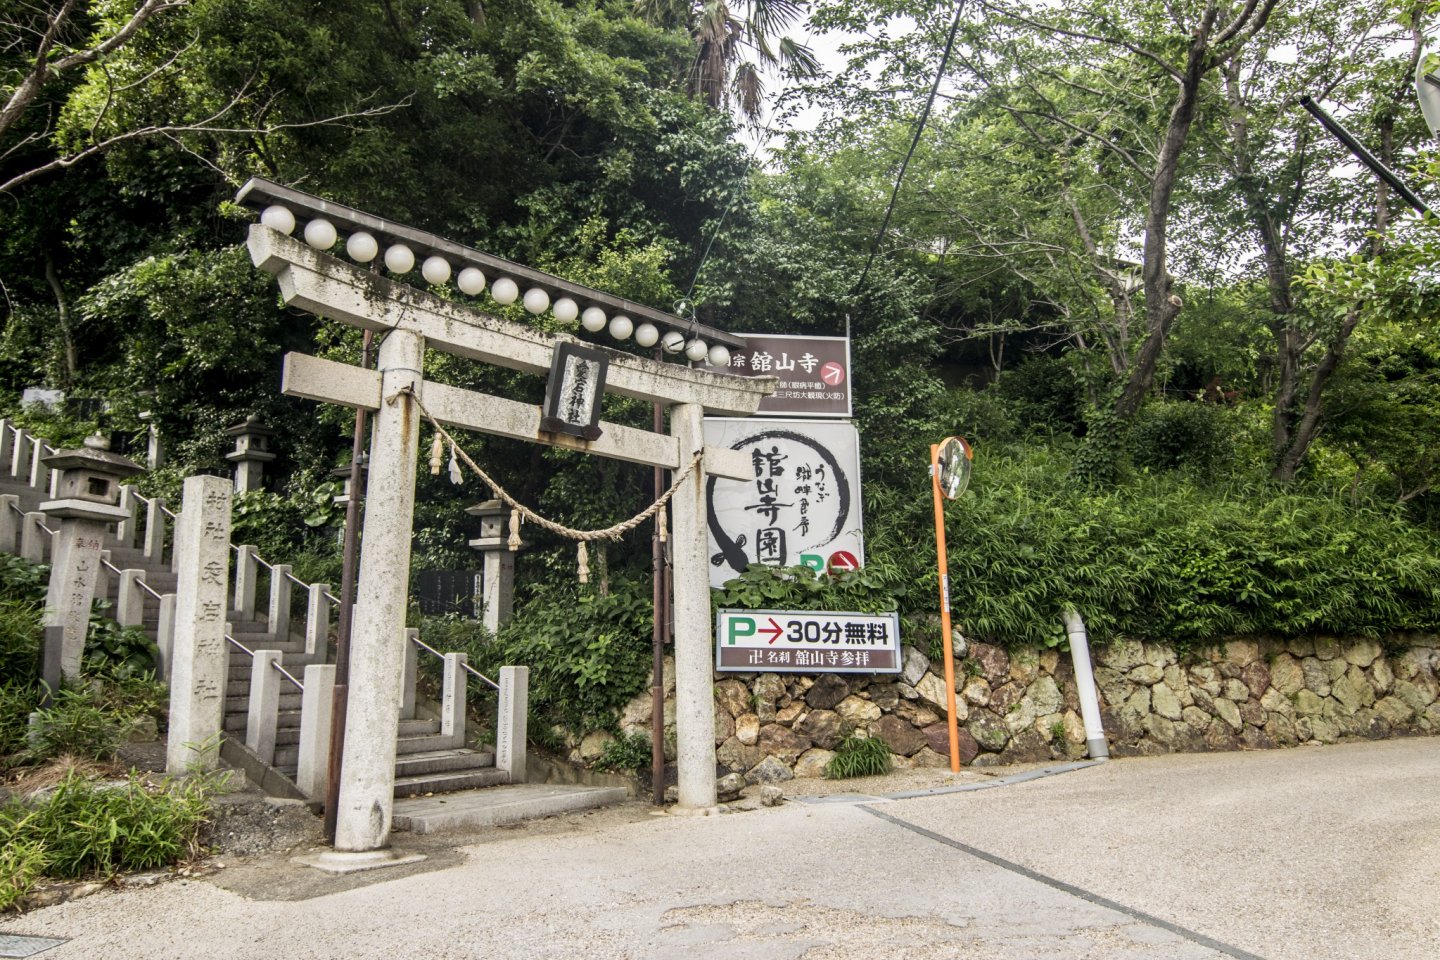 The entrance tori to Kanzanji Temple. This small entry leads to a whole new world of sights to behold.